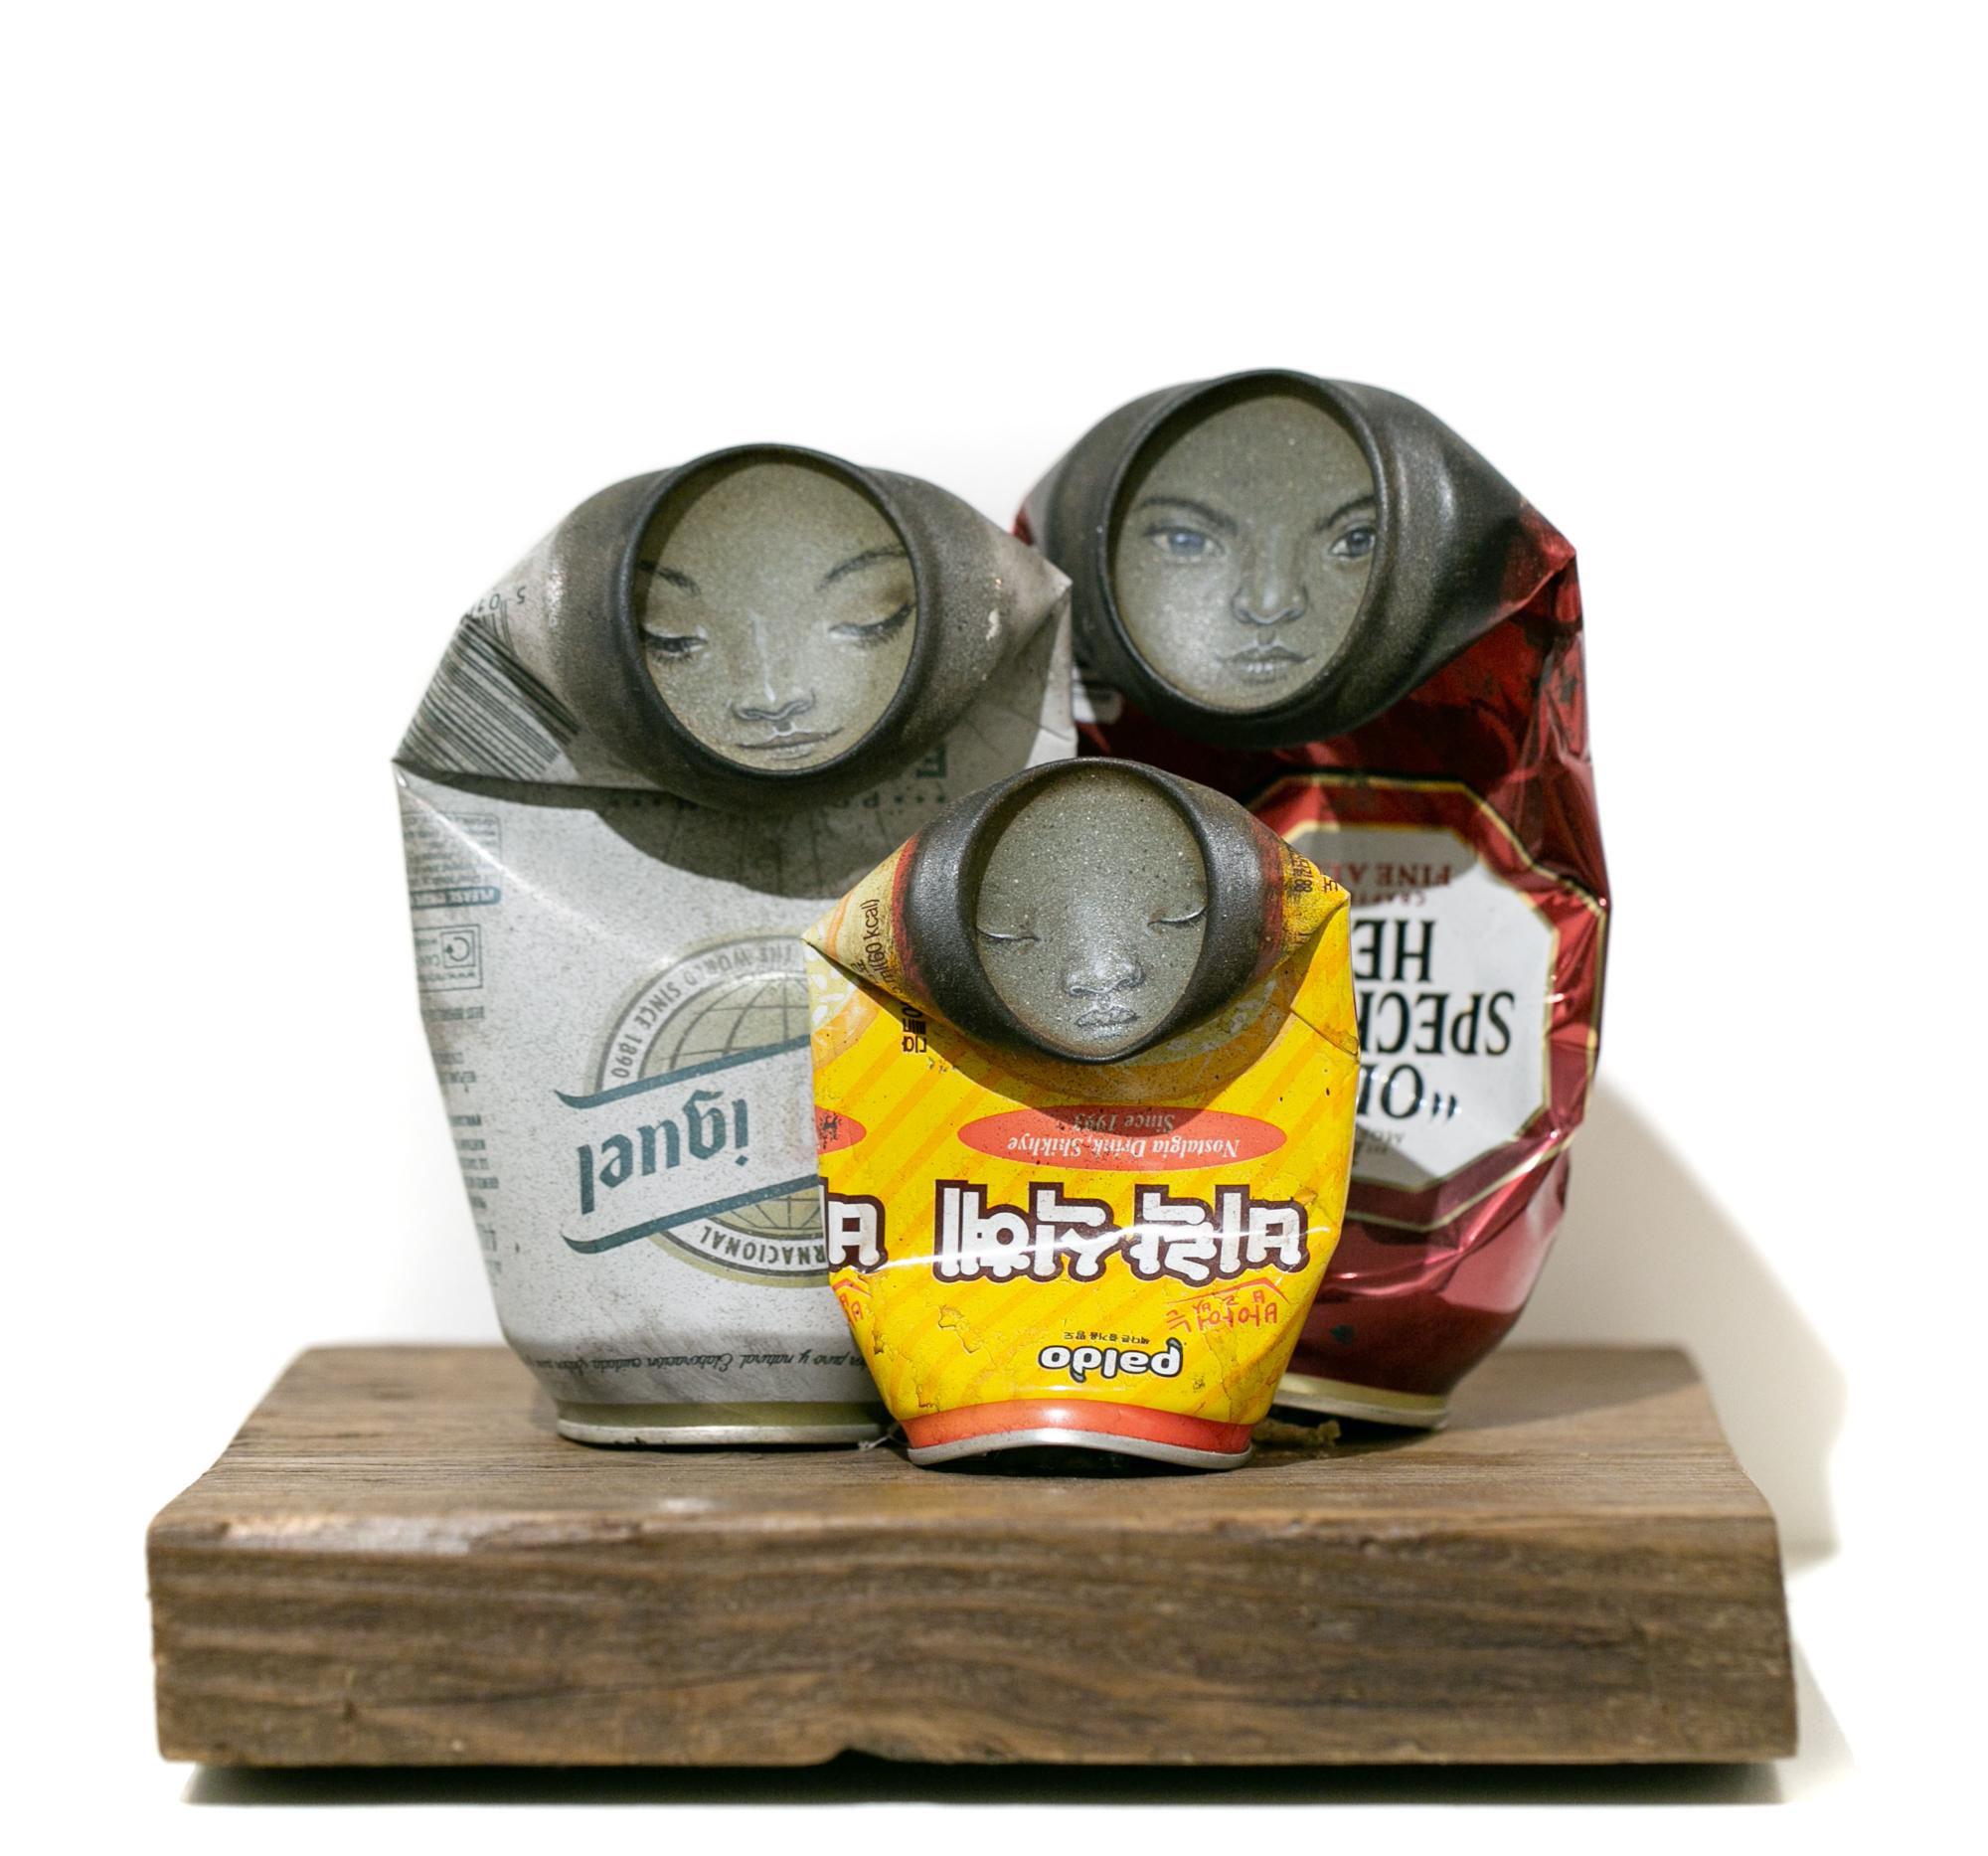 My Dog Sighs Figurative Sculpture - "Family", Folded Can Freestanding Sculpture, Painted faces, Found objects